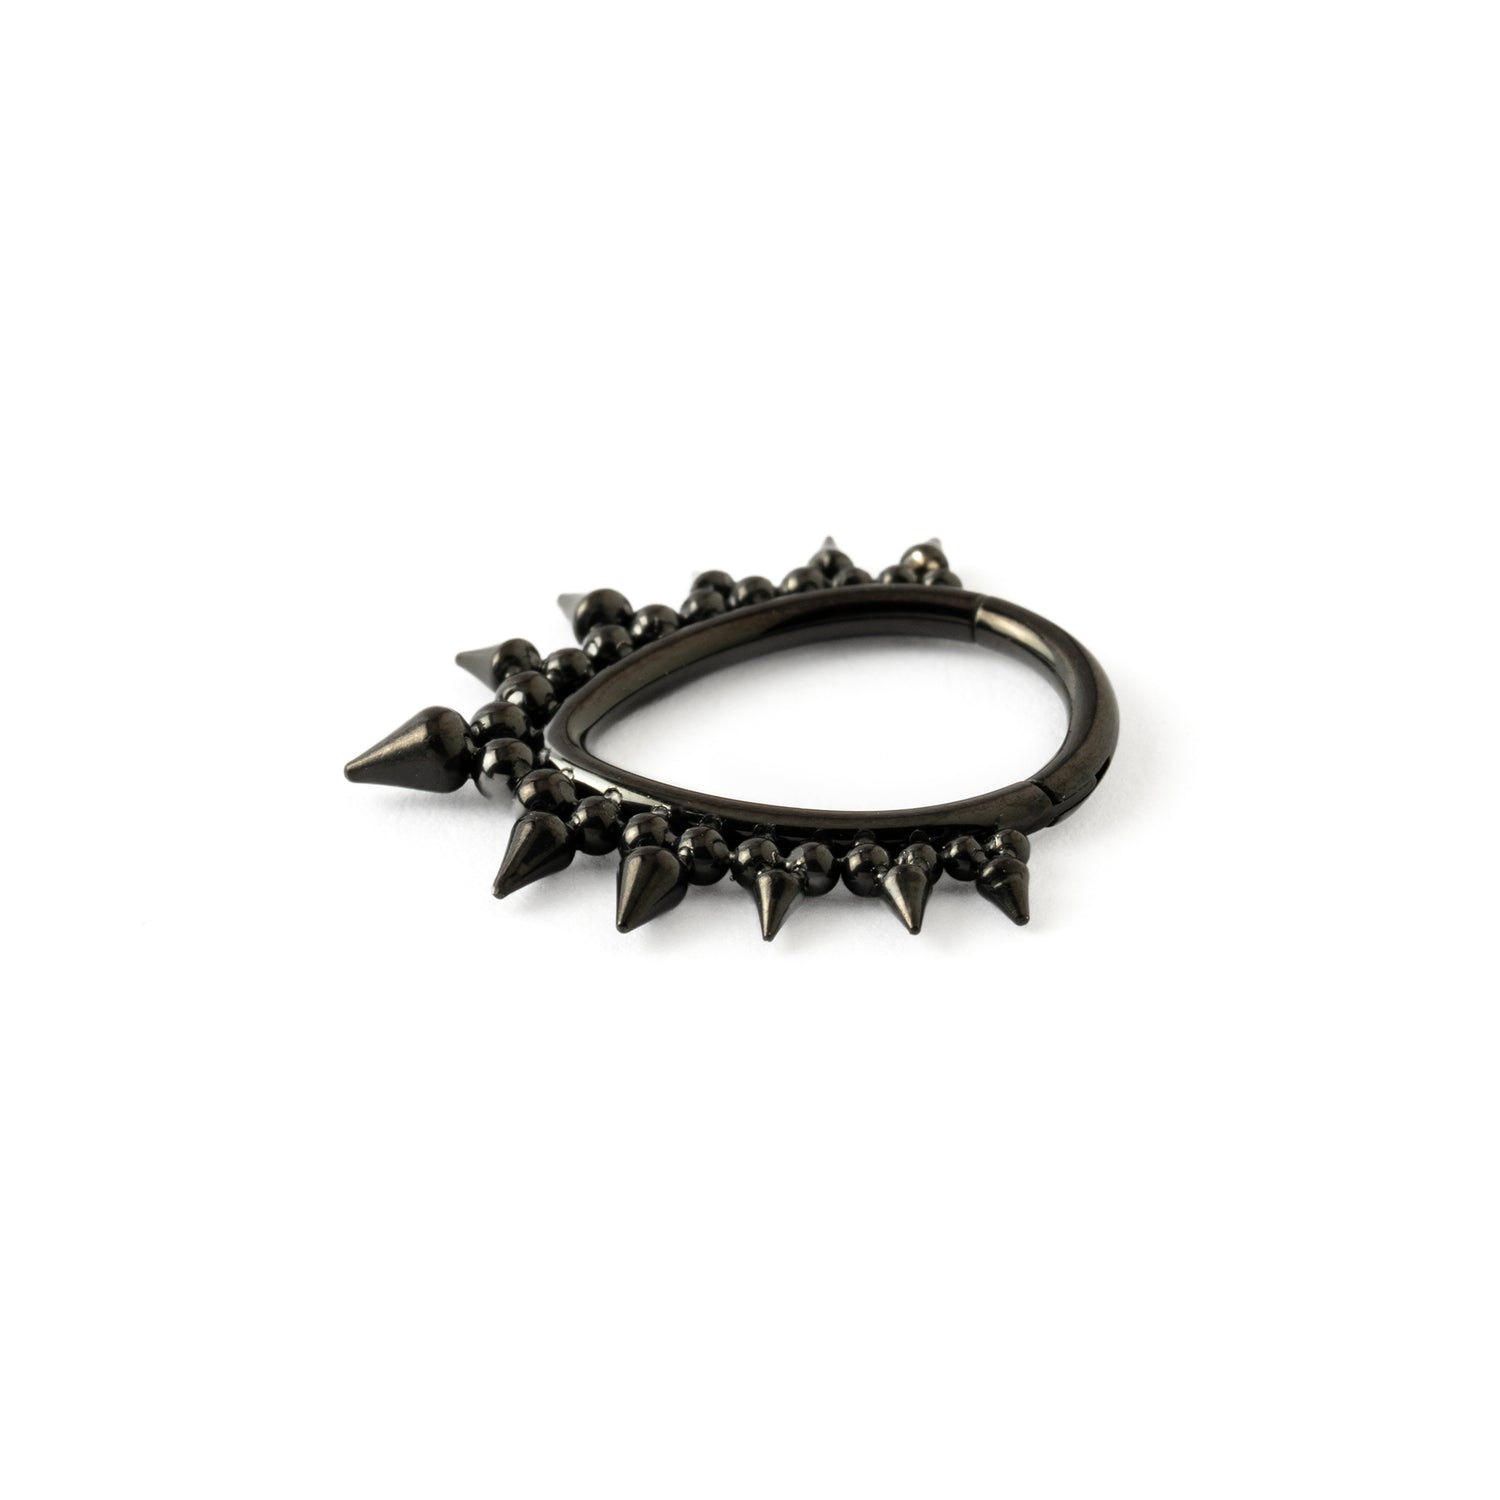 Spiky Brenna Black surgical steel Septum Clicker ring side view